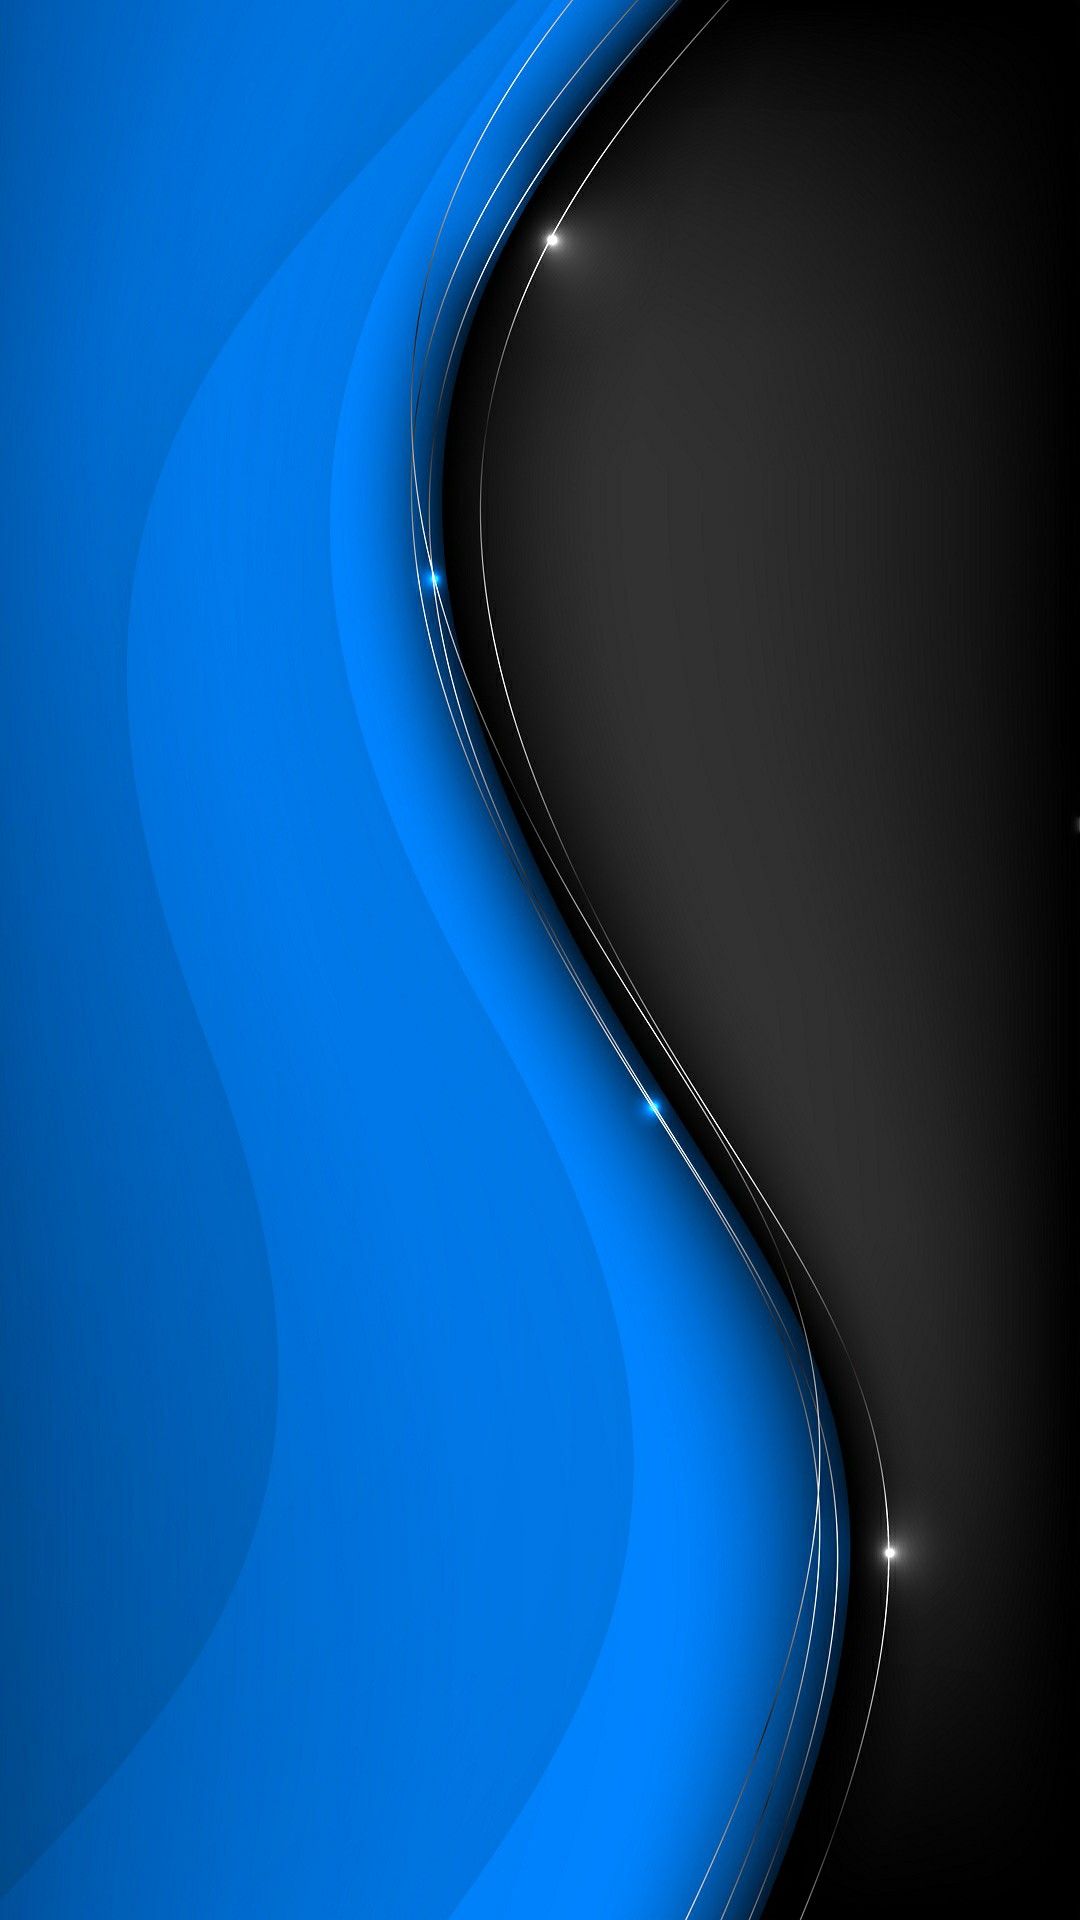 Apple Iphone Hd Blue And Black Wallpapers - Wallpaper Cave